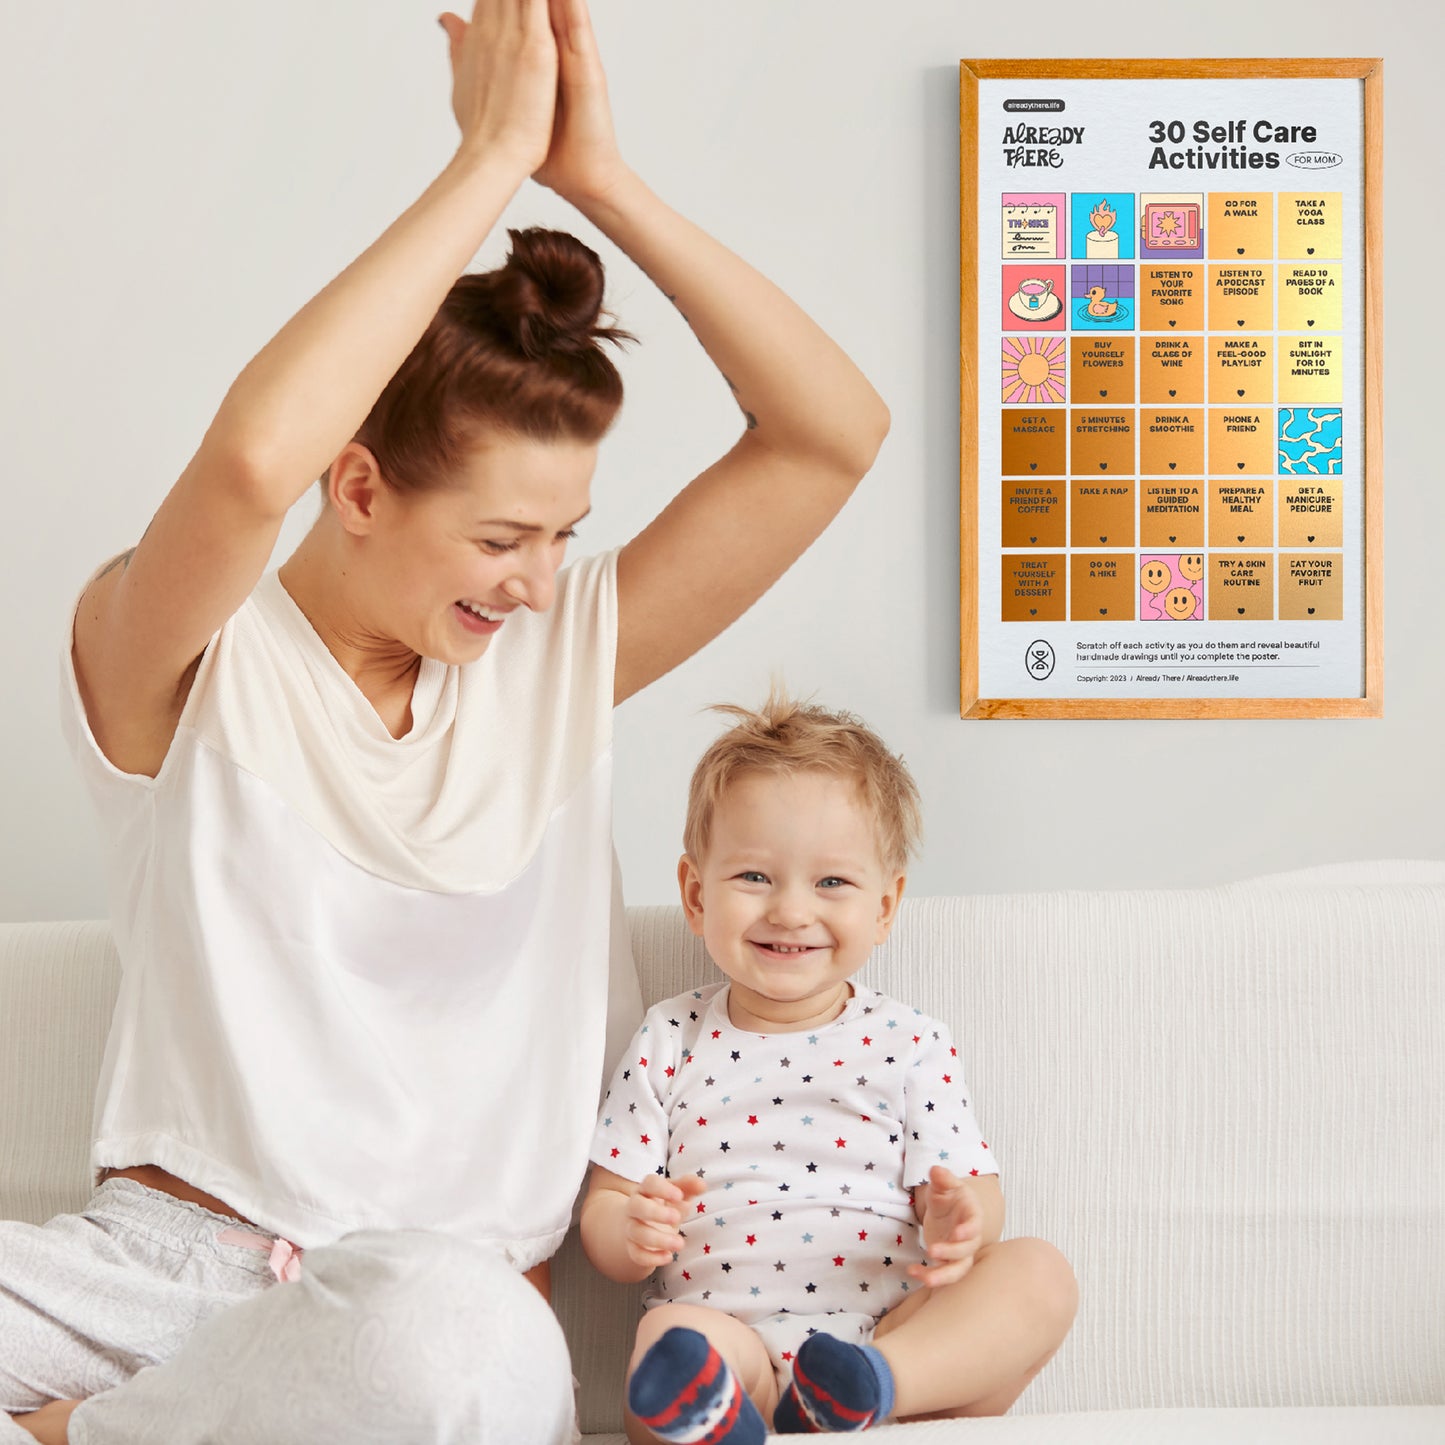 30 Self Care Activities For Mom  - Scratch Off Poster